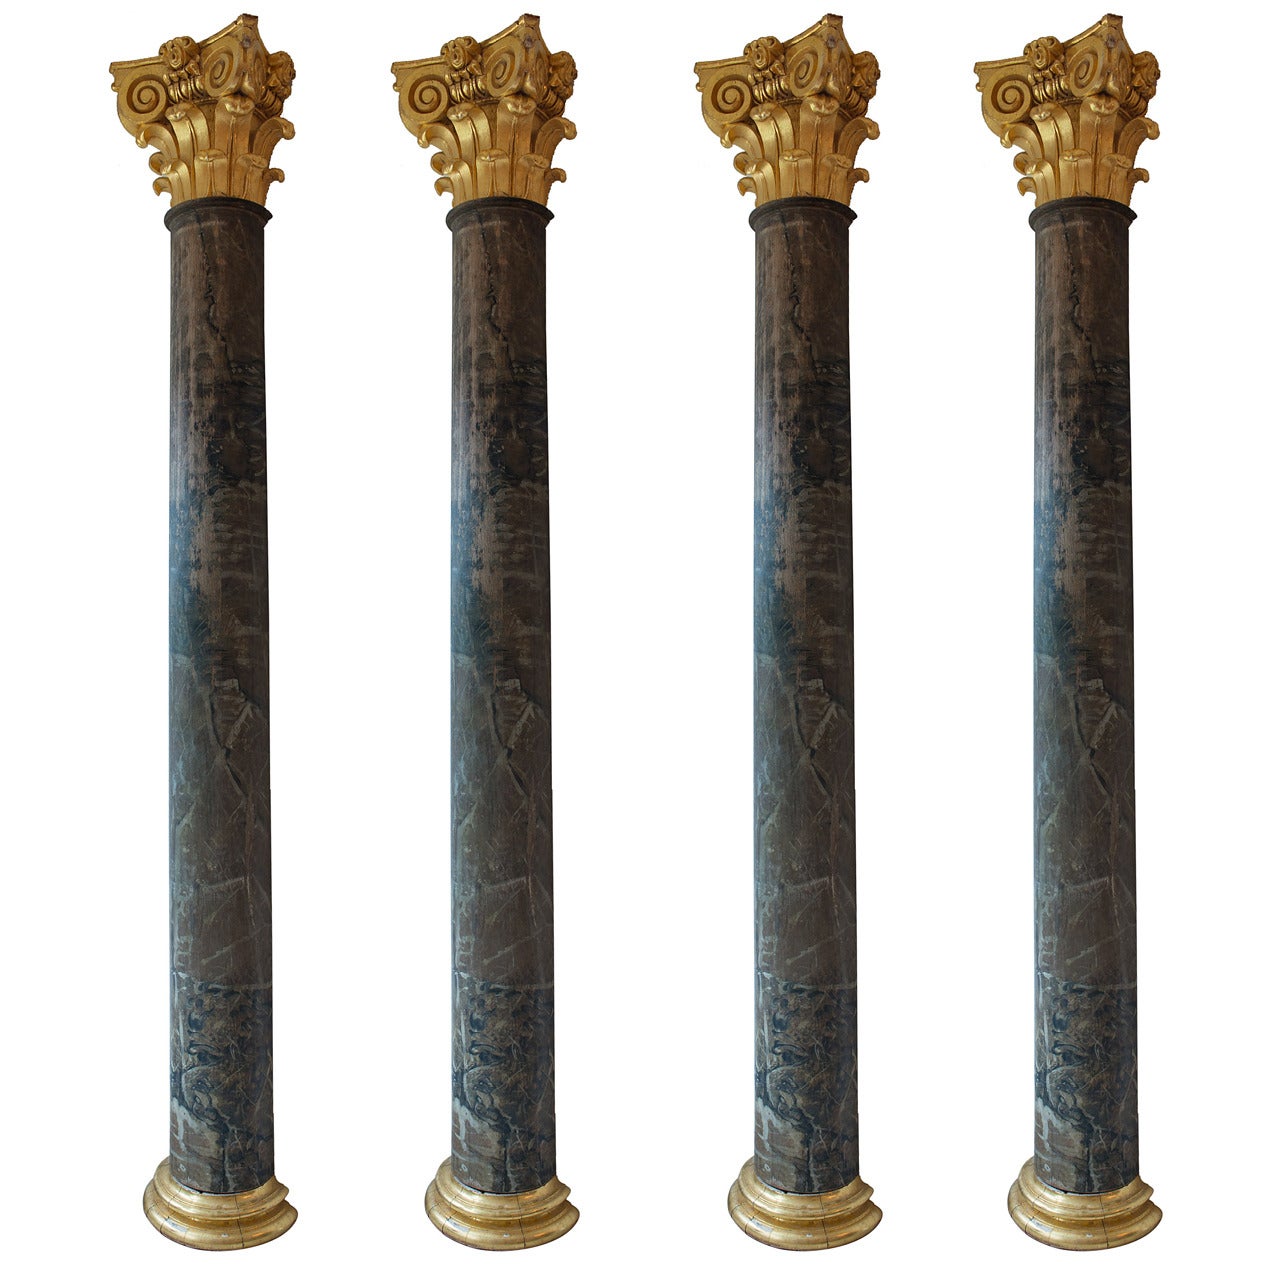 Set of Four Belgian Marbleized Pilasters with Giltwood Capitals, 18th Century For Sale